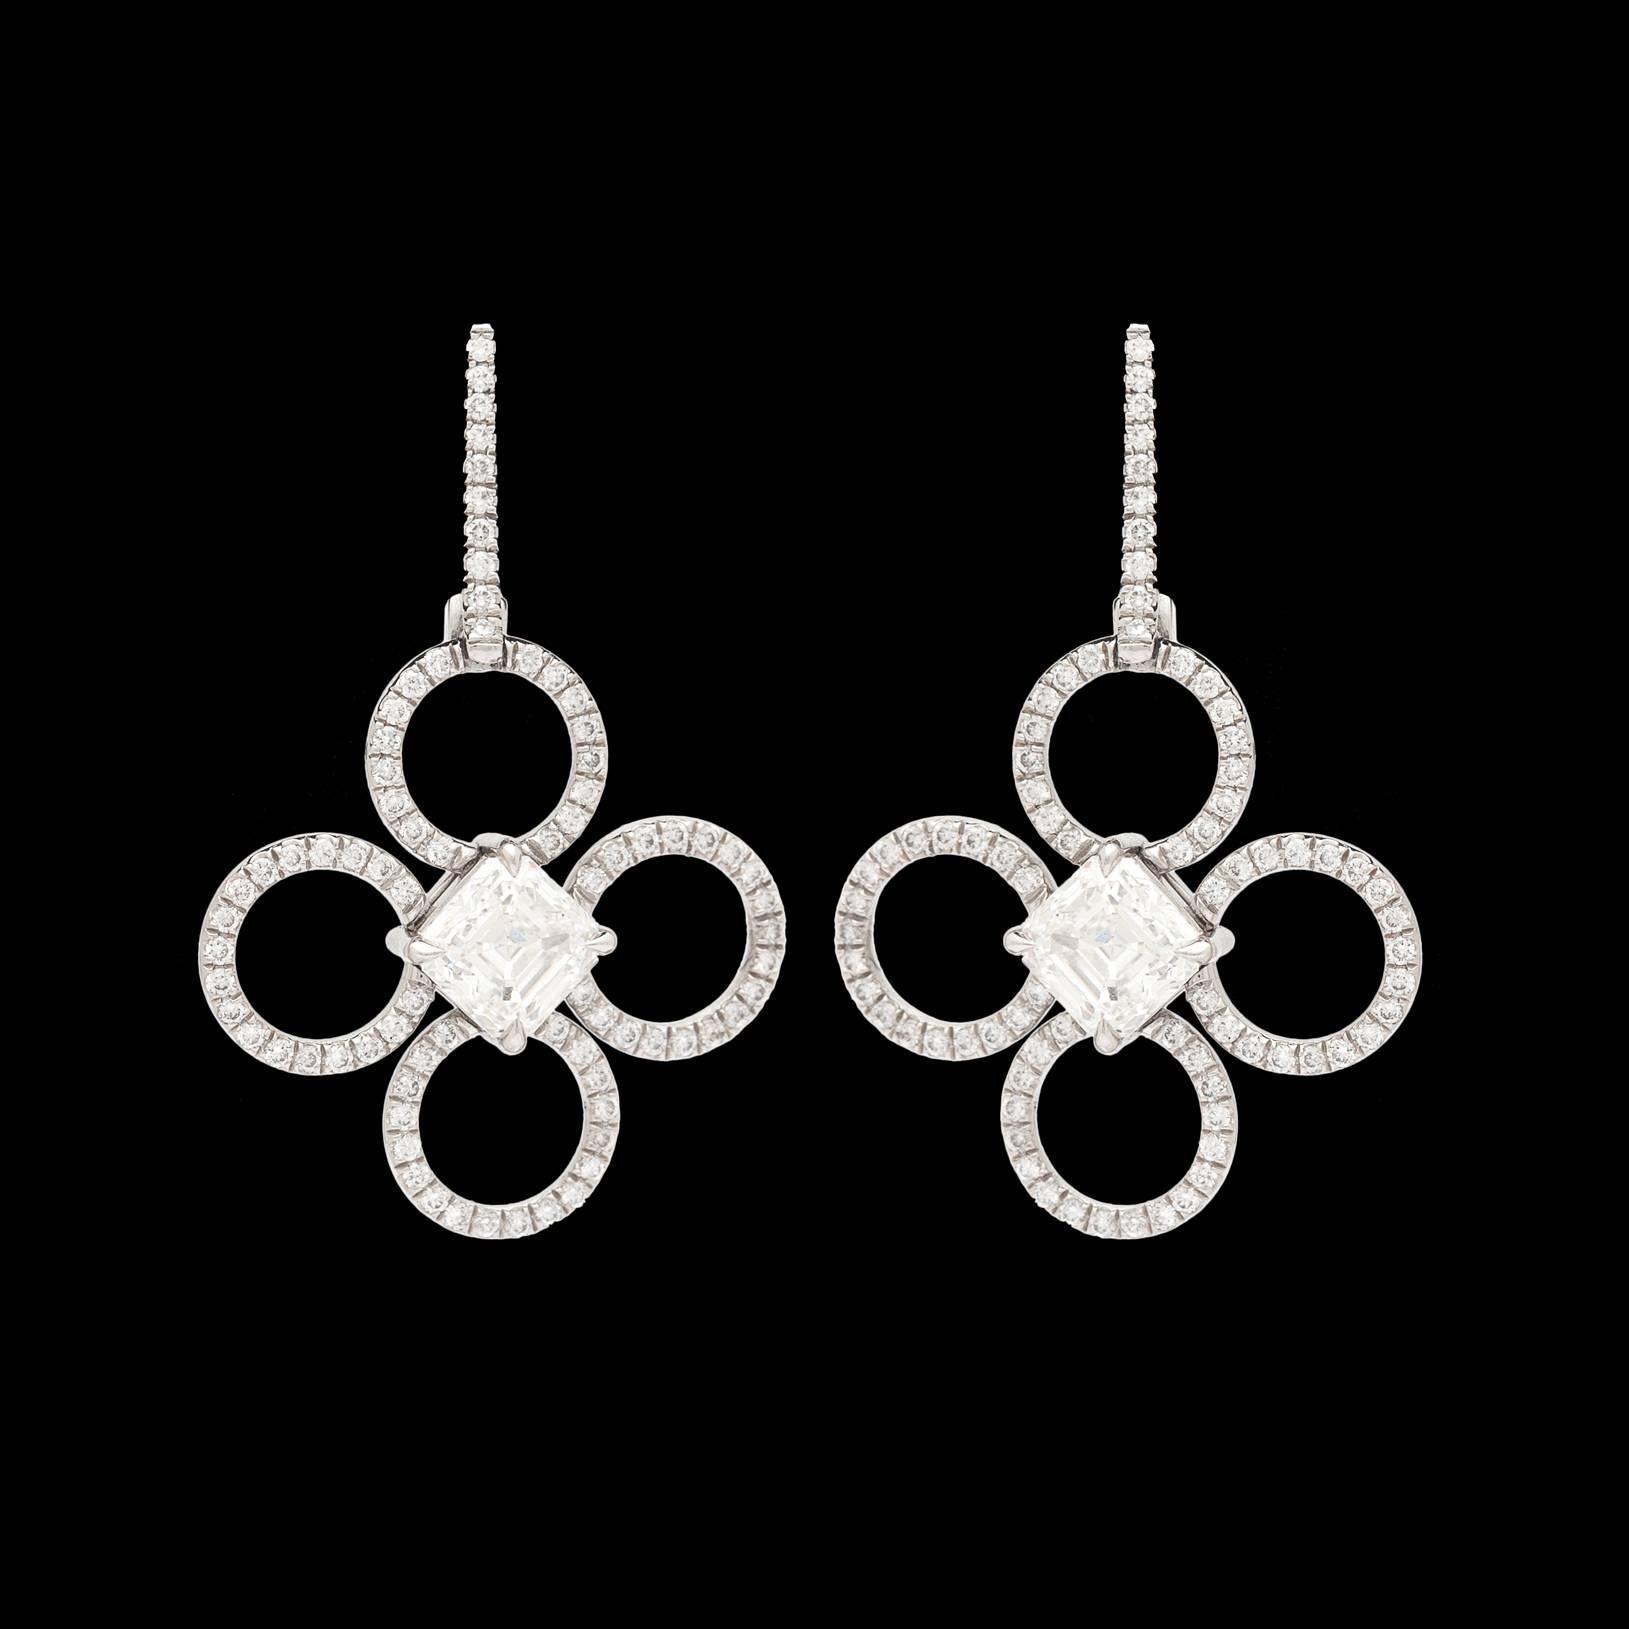 Daniel K. platinum clover earrings features two GIA 0.97-ct H VS1 Asscher Cut Diamonds totaling 1.94-ctw for both. The hand made mountings are enhanced with round brilliant cut diamonds totaling 0.56 carats. Each earring measures 1.25 inches long